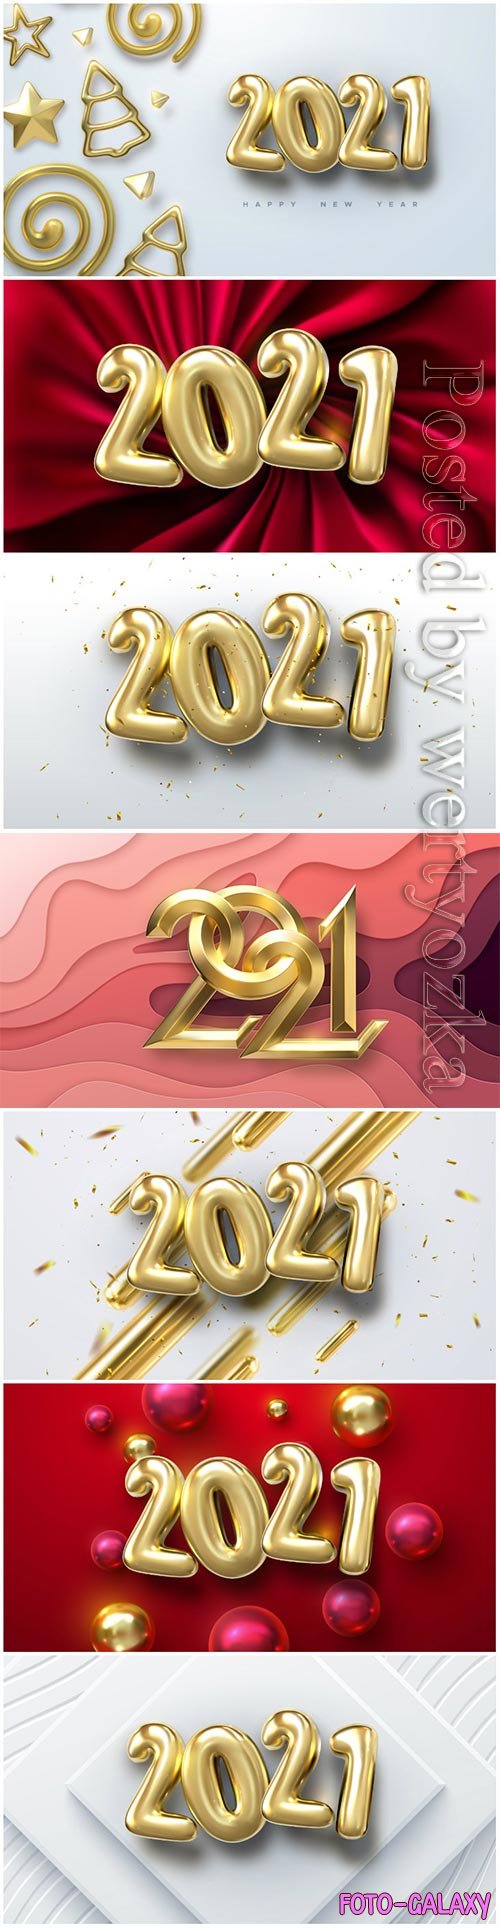 Numbers 2021 for new year vector illustration